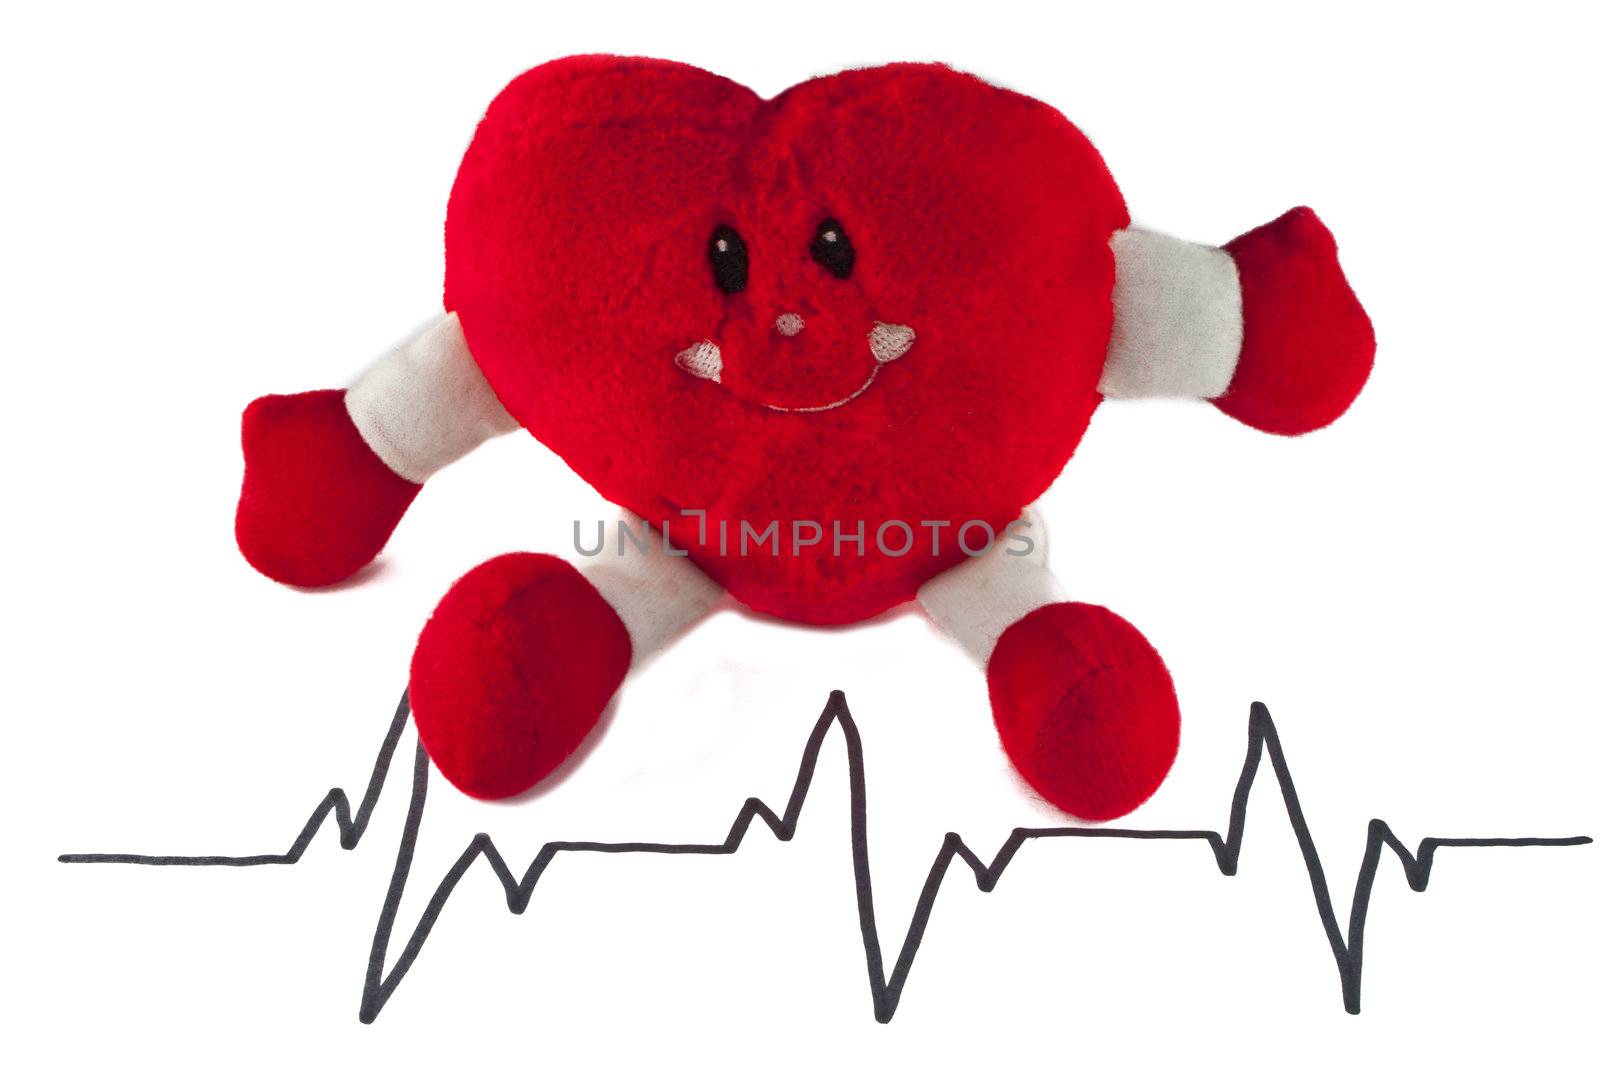 Photo of plush heart and its cardiogram